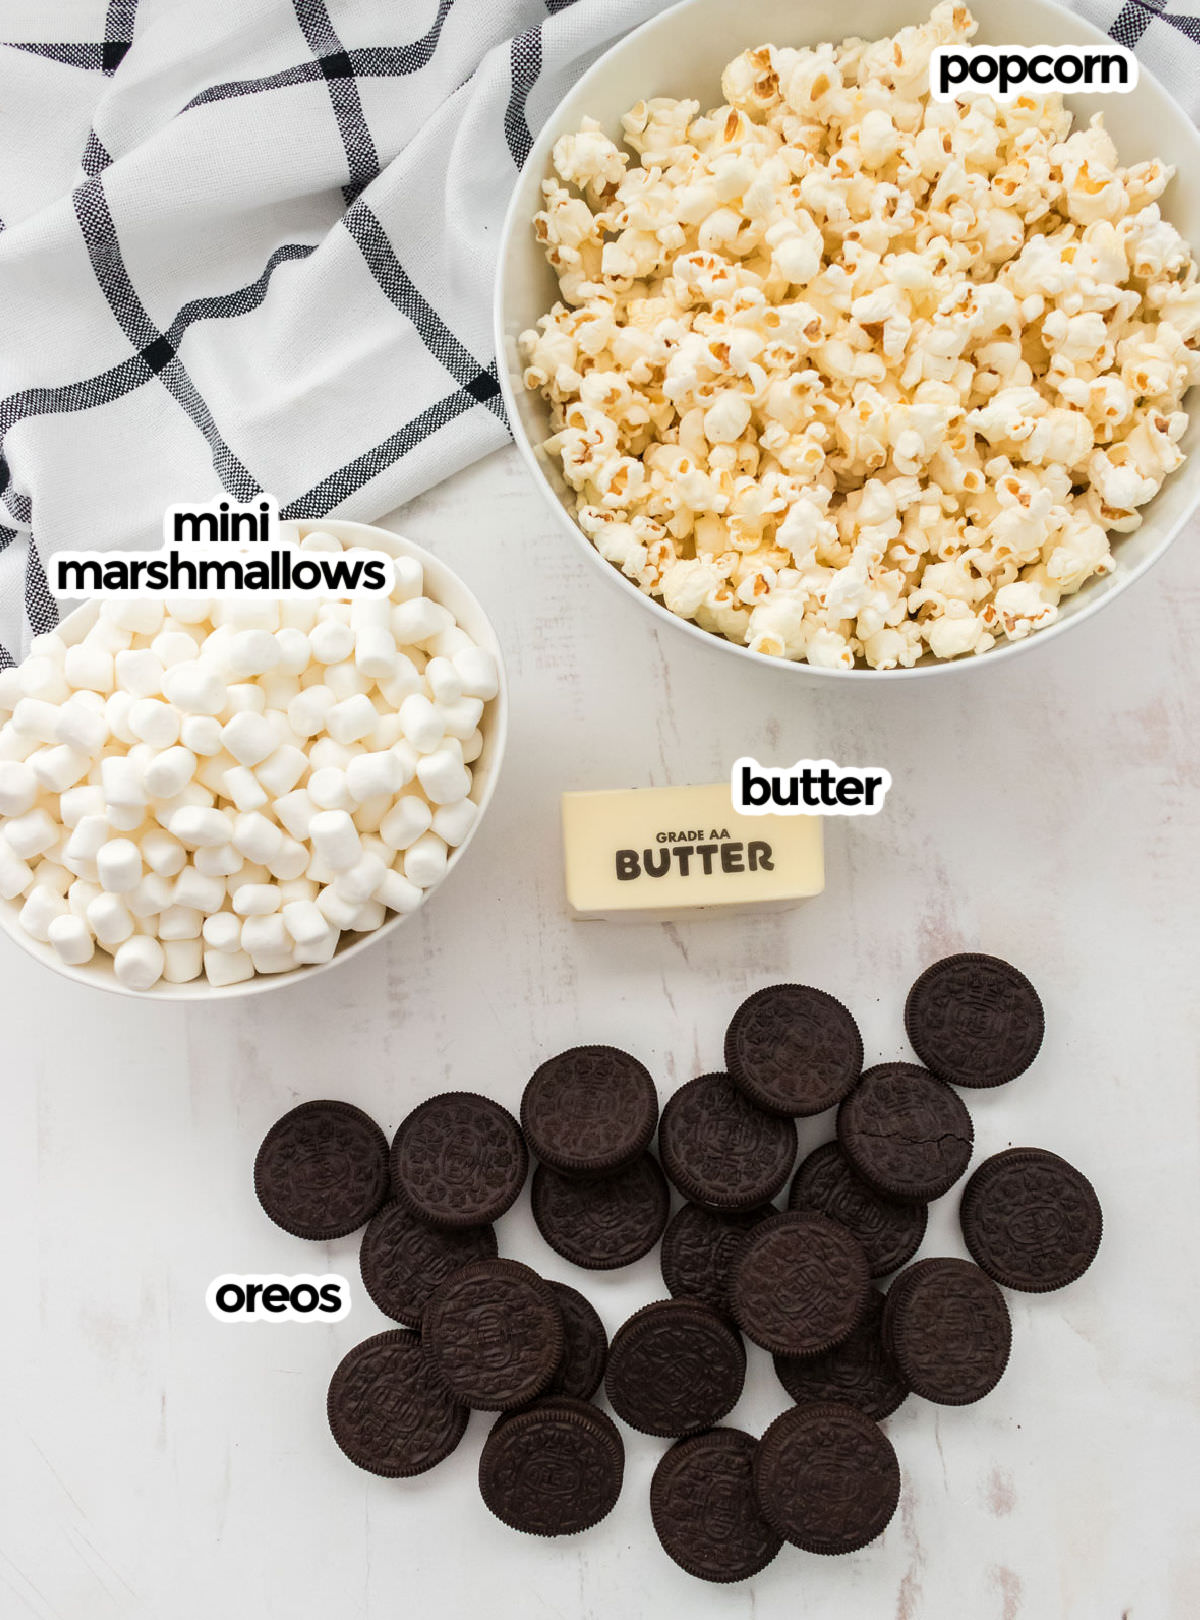 All the ingredients you will need to make Oreo Popcorn including popcorn, mini marshmallows, butter and Oreo Cookies.